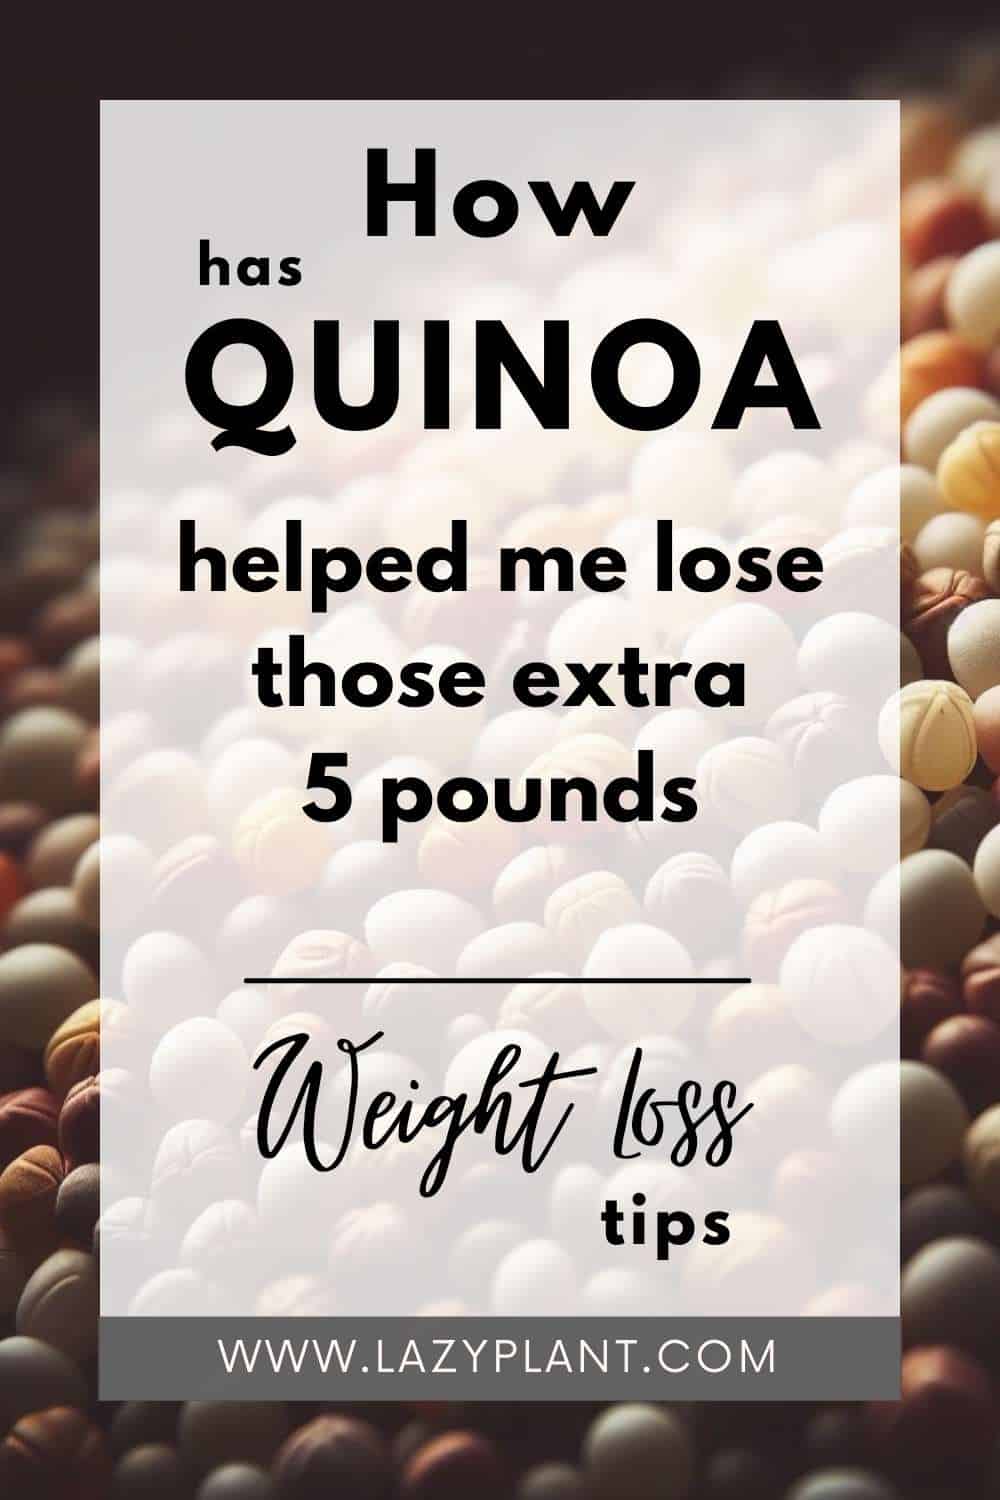 How has Quinoa helped me lose body weight?